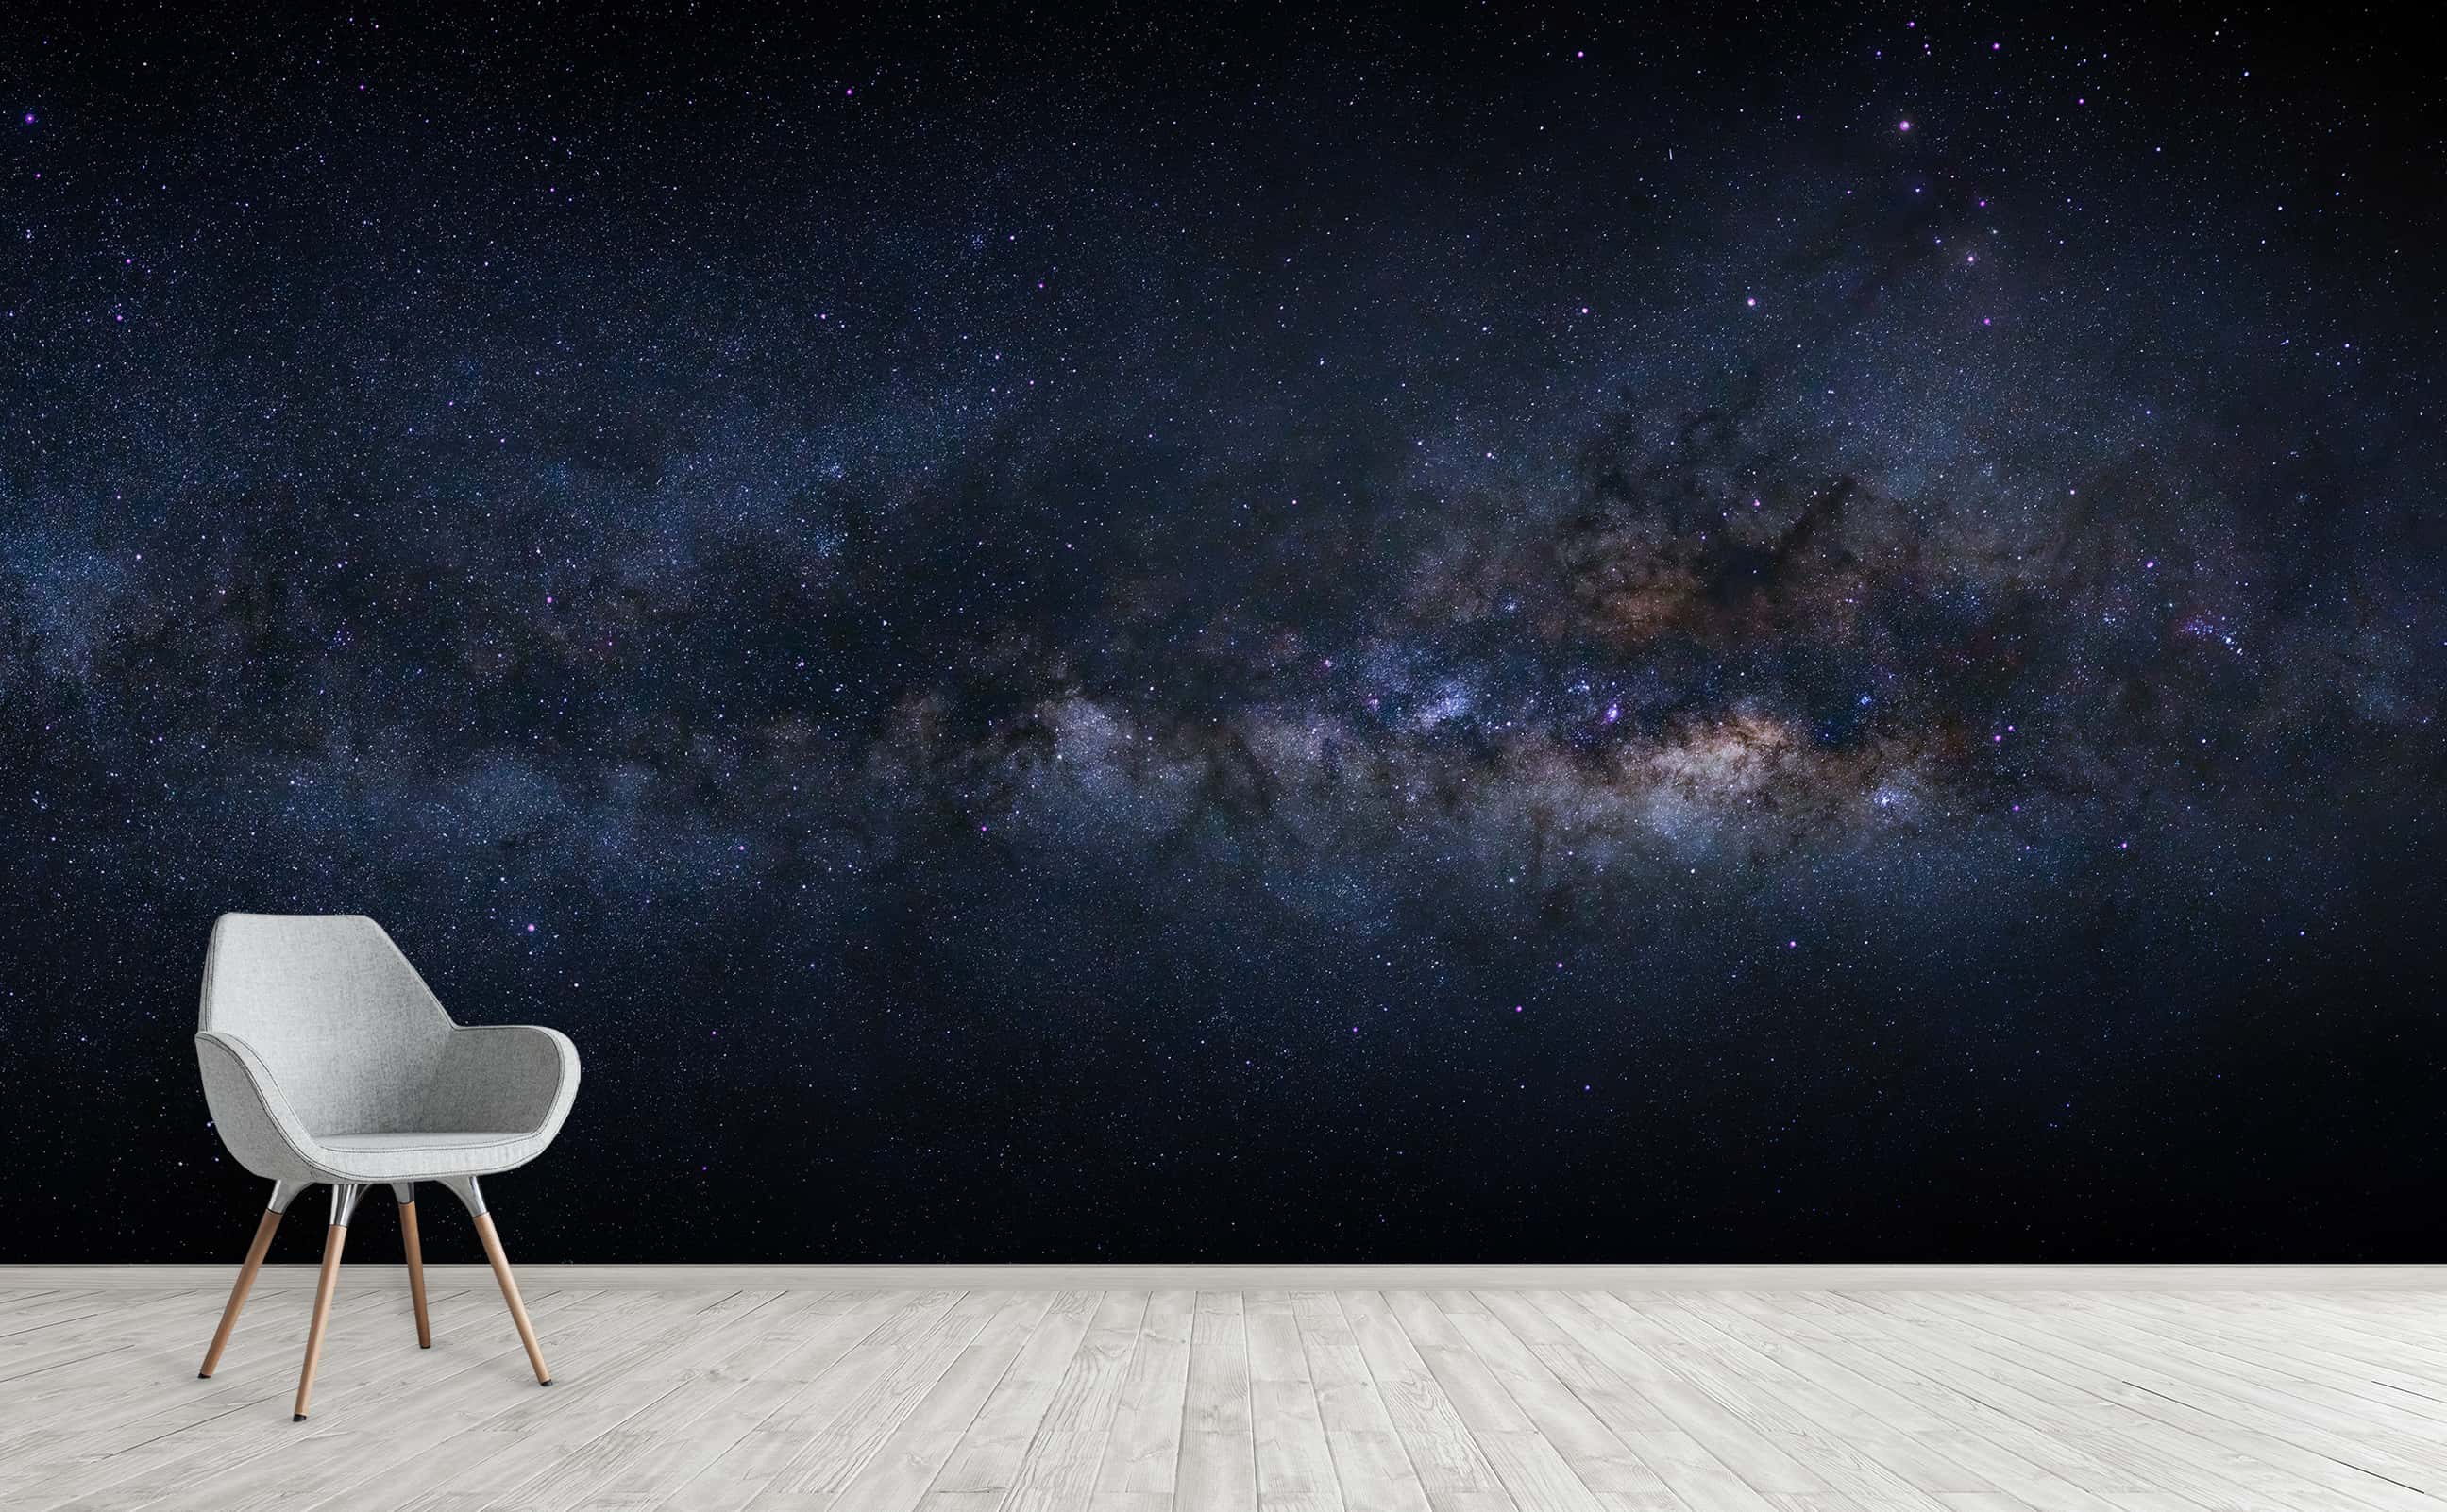 Final Frontier Wall Mural by Walls Need LoveÂ®